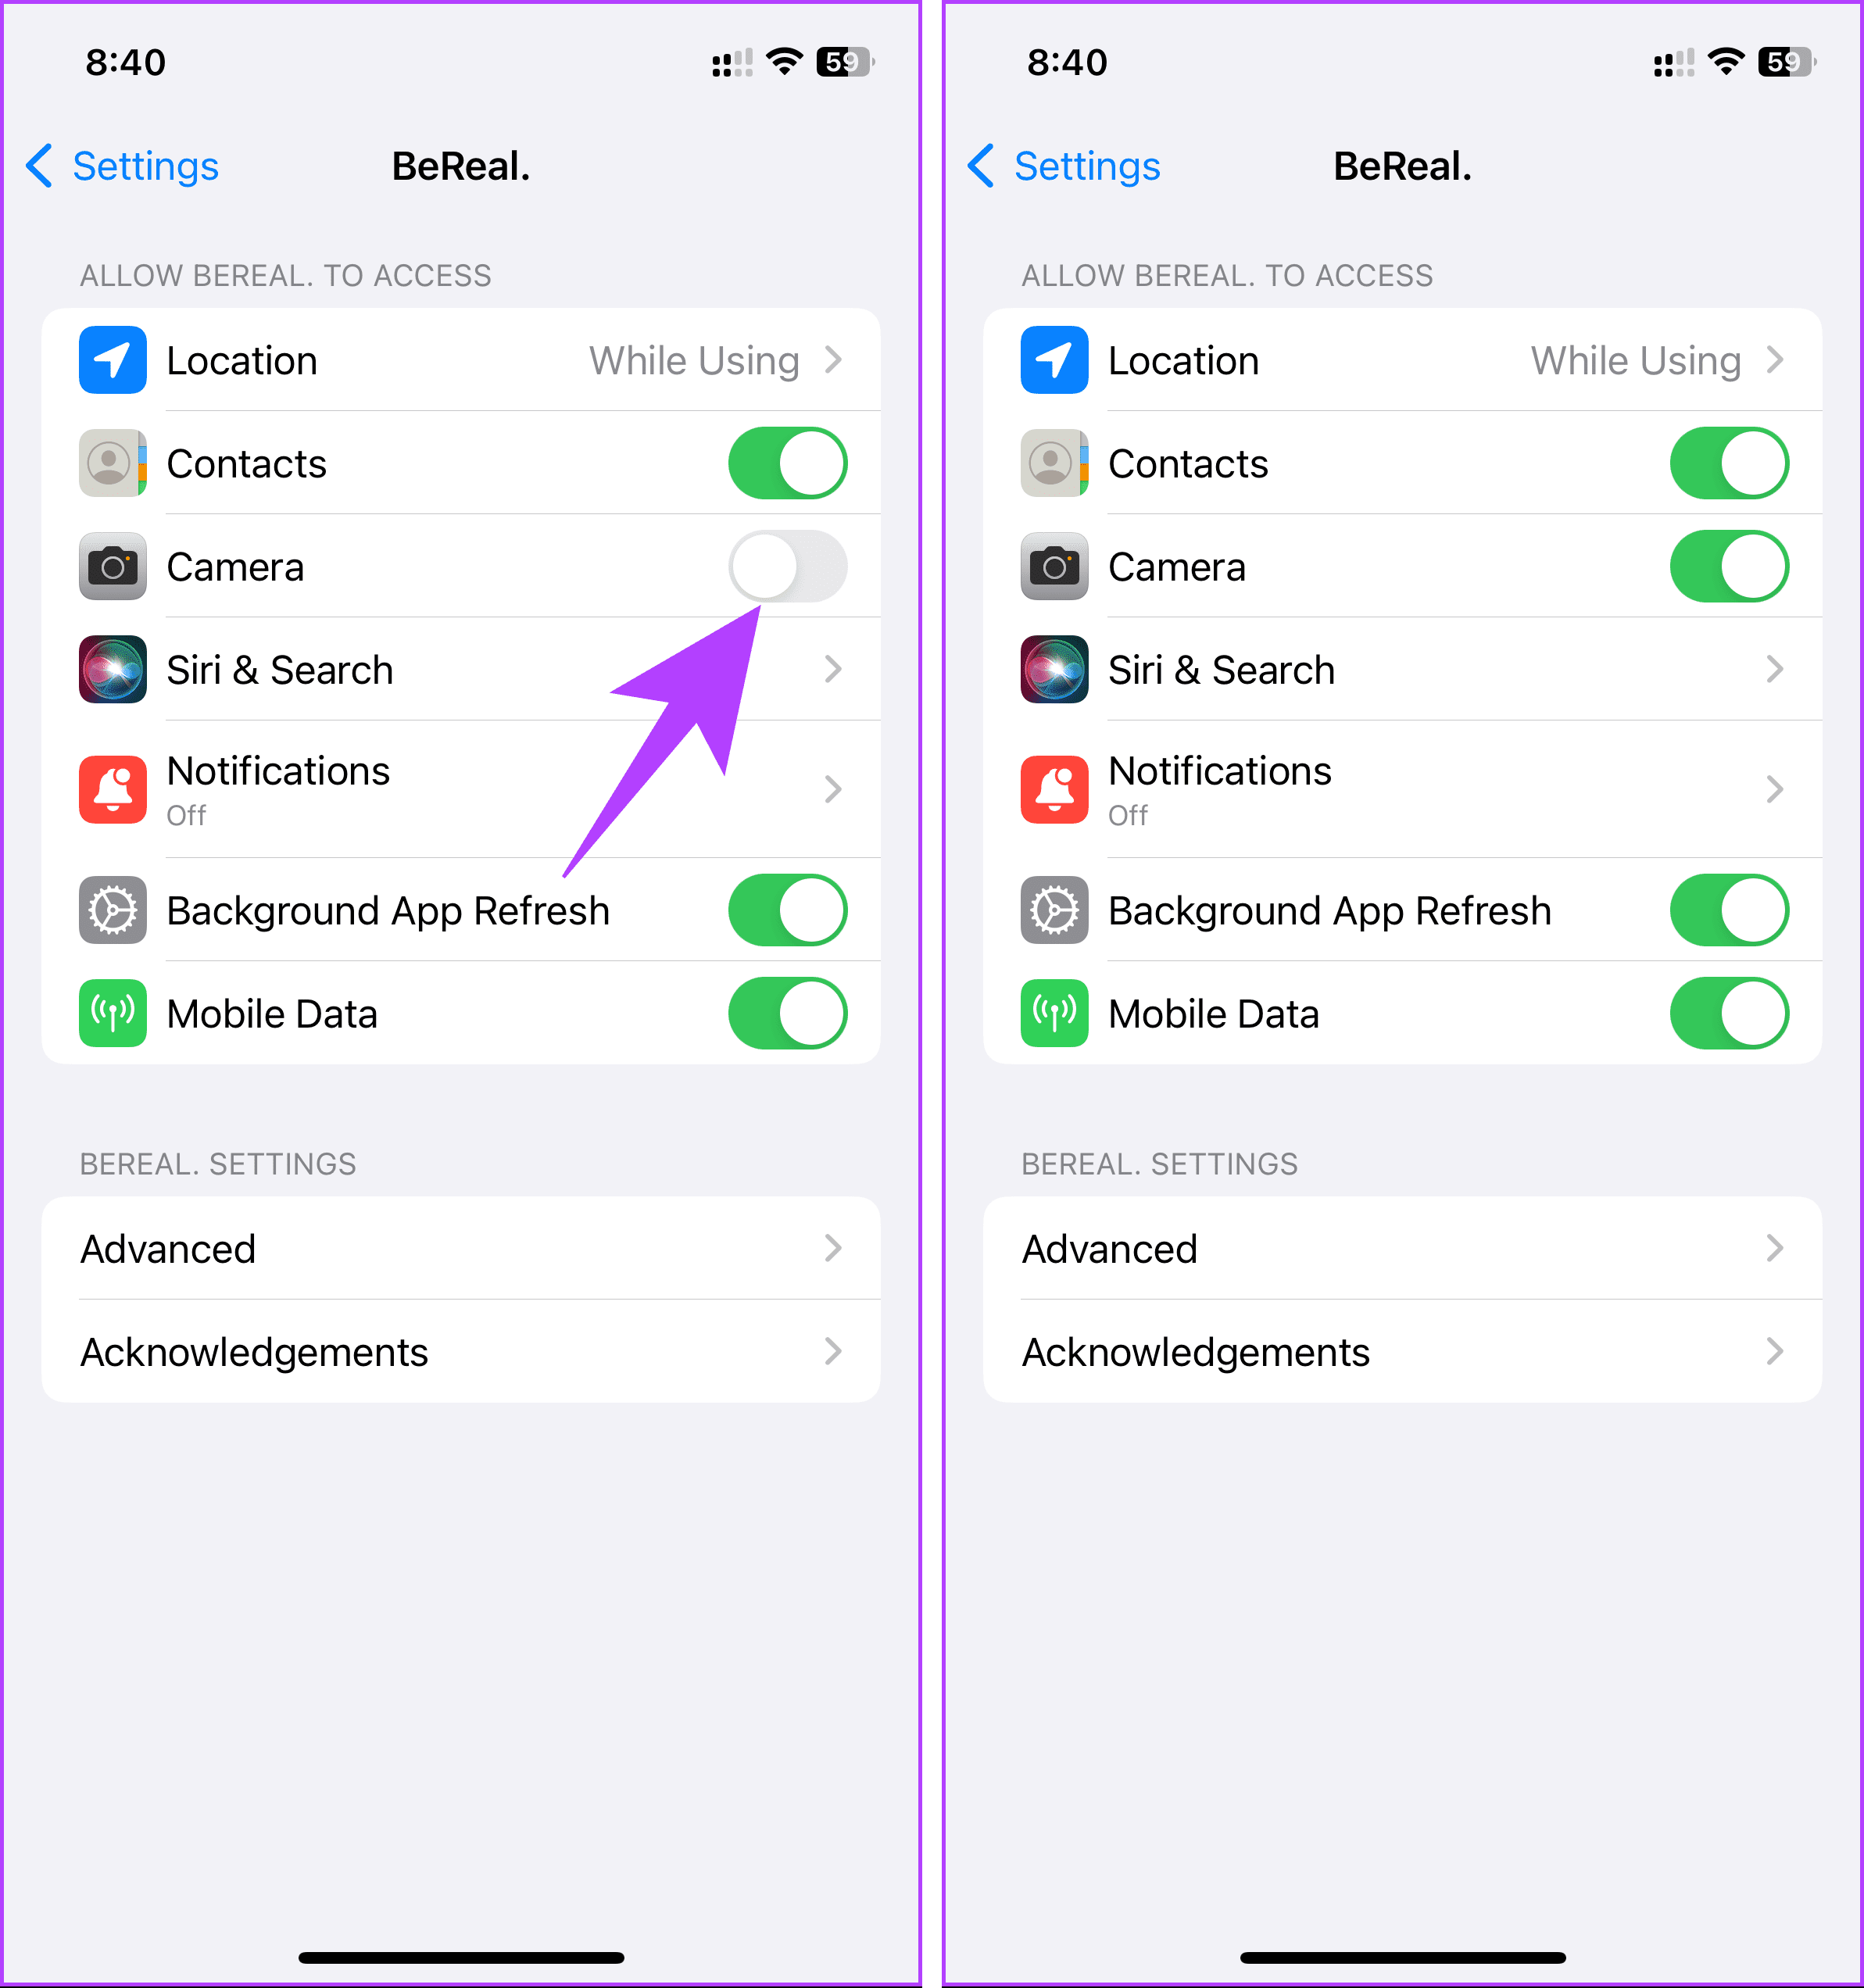 toggle on the Camera in the app settings